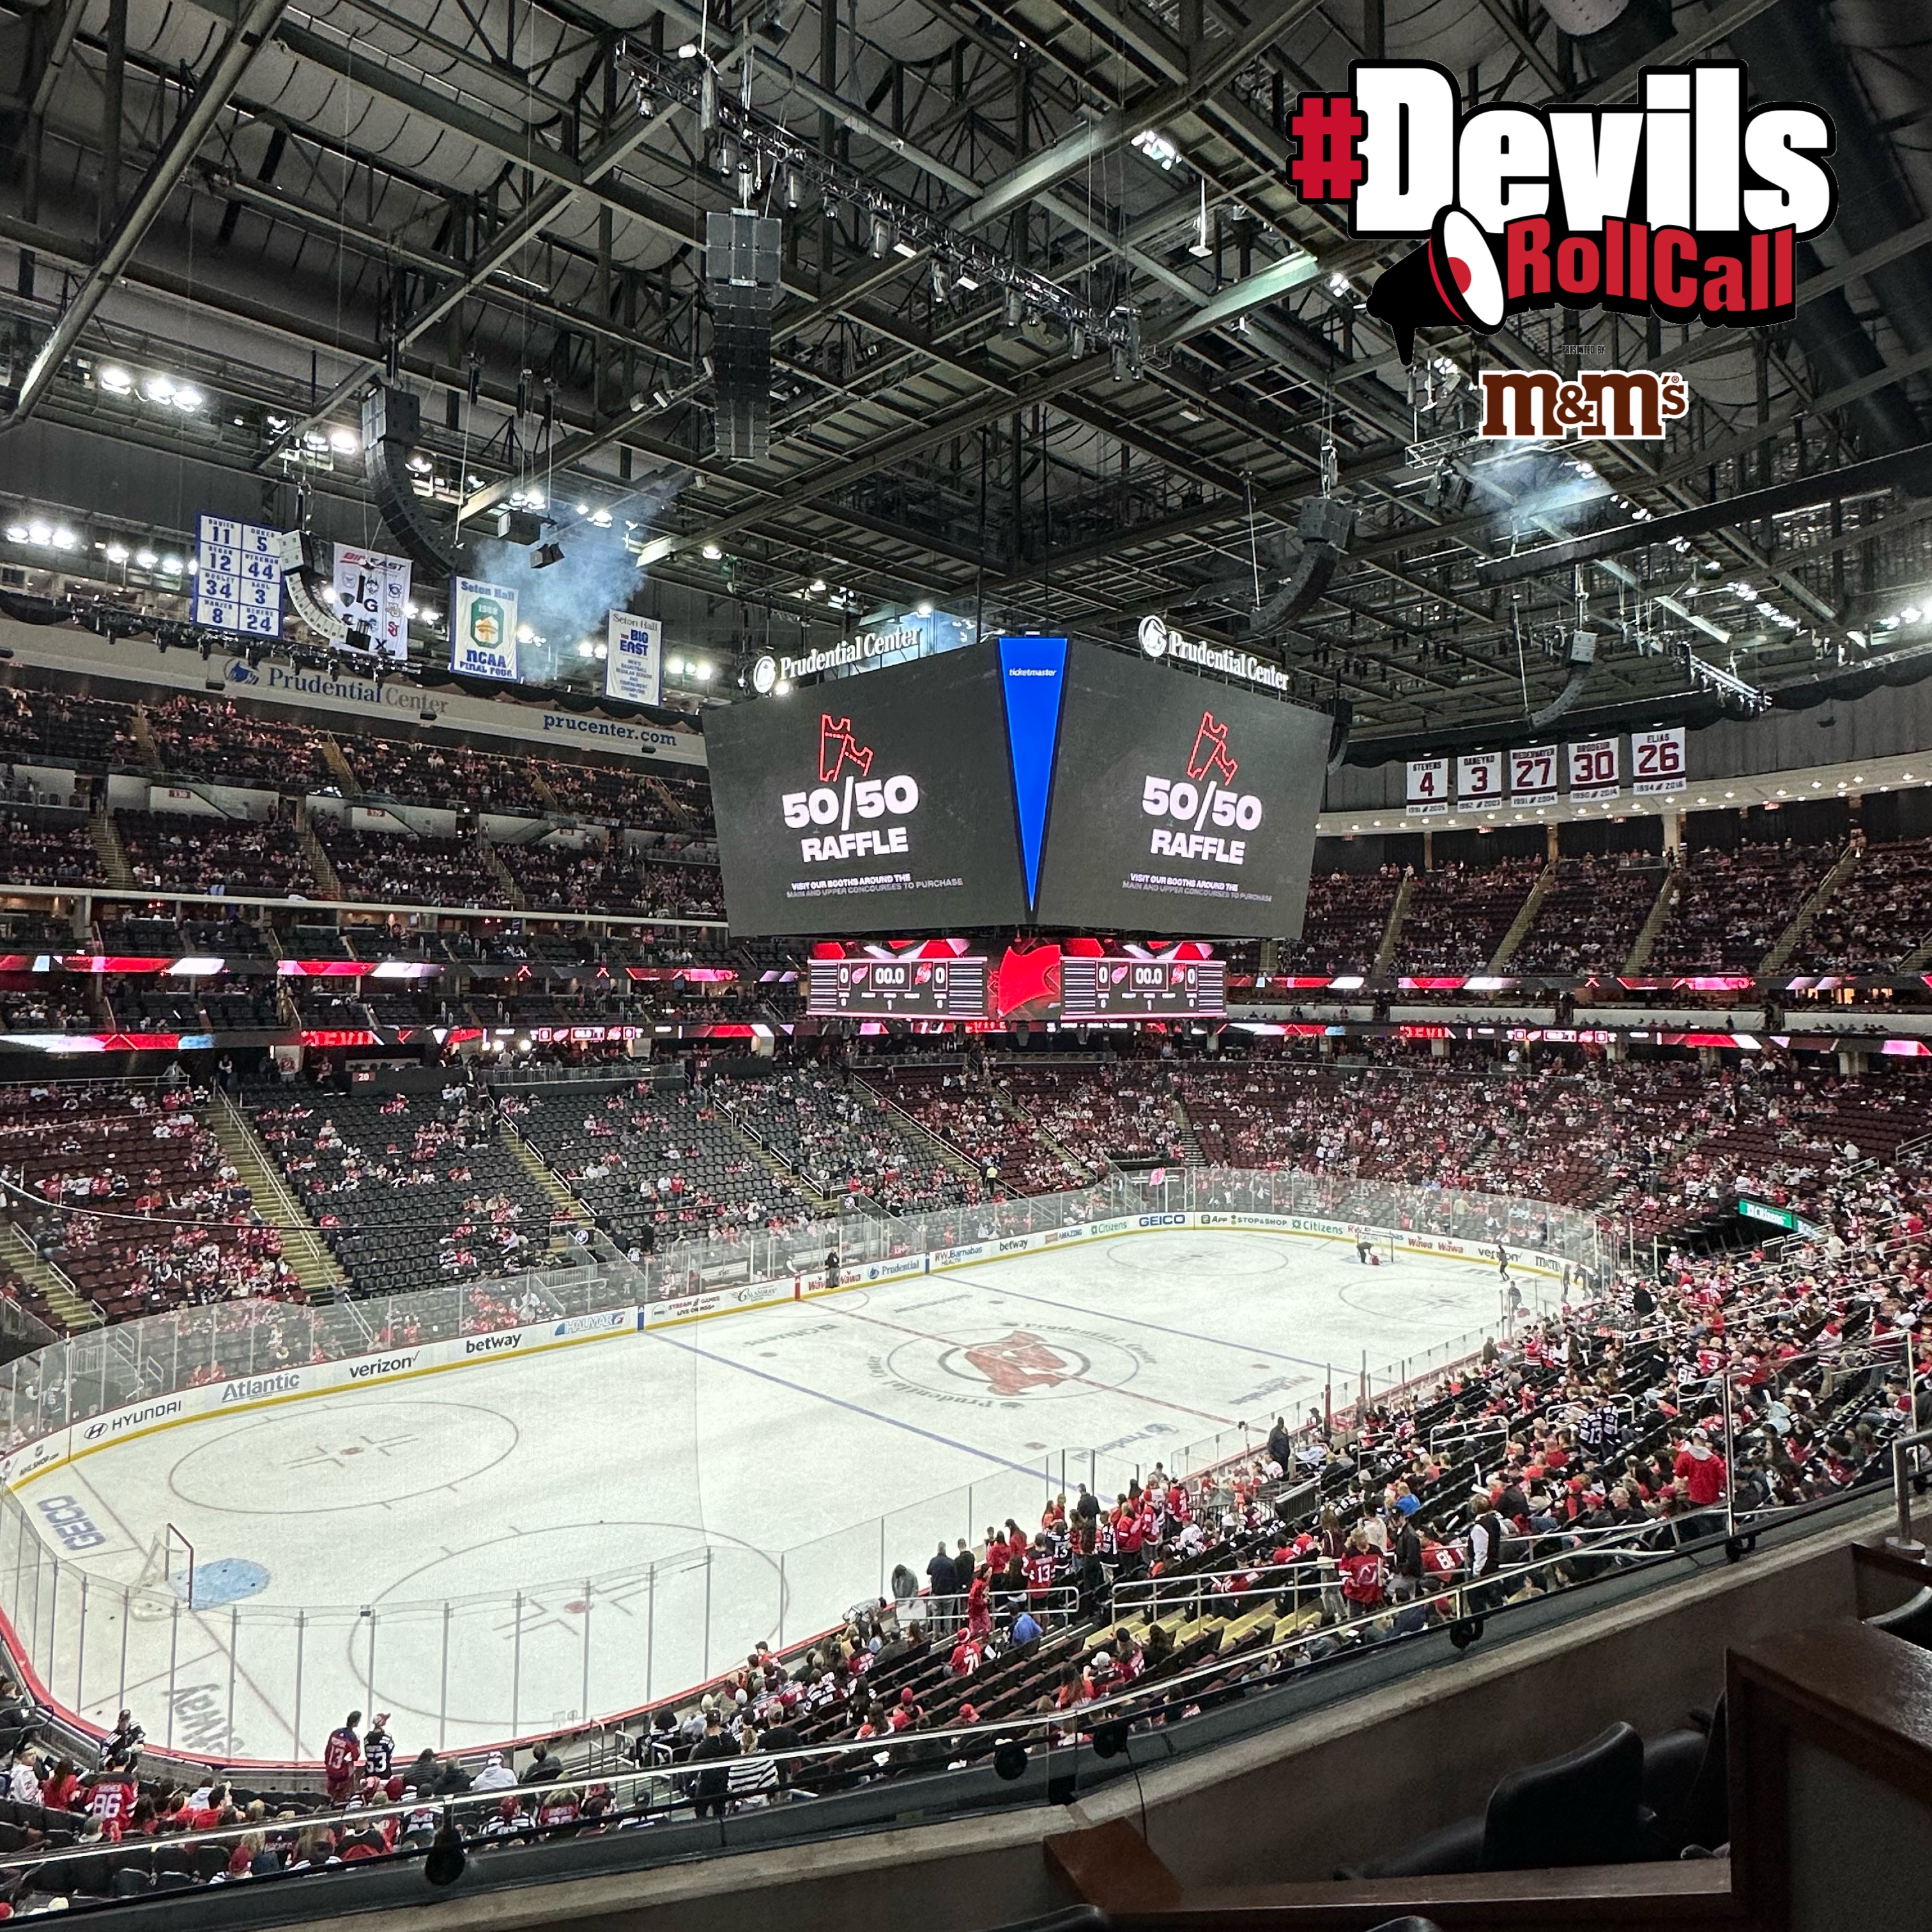 Prudential Center - New Jersey Devils - 2016 